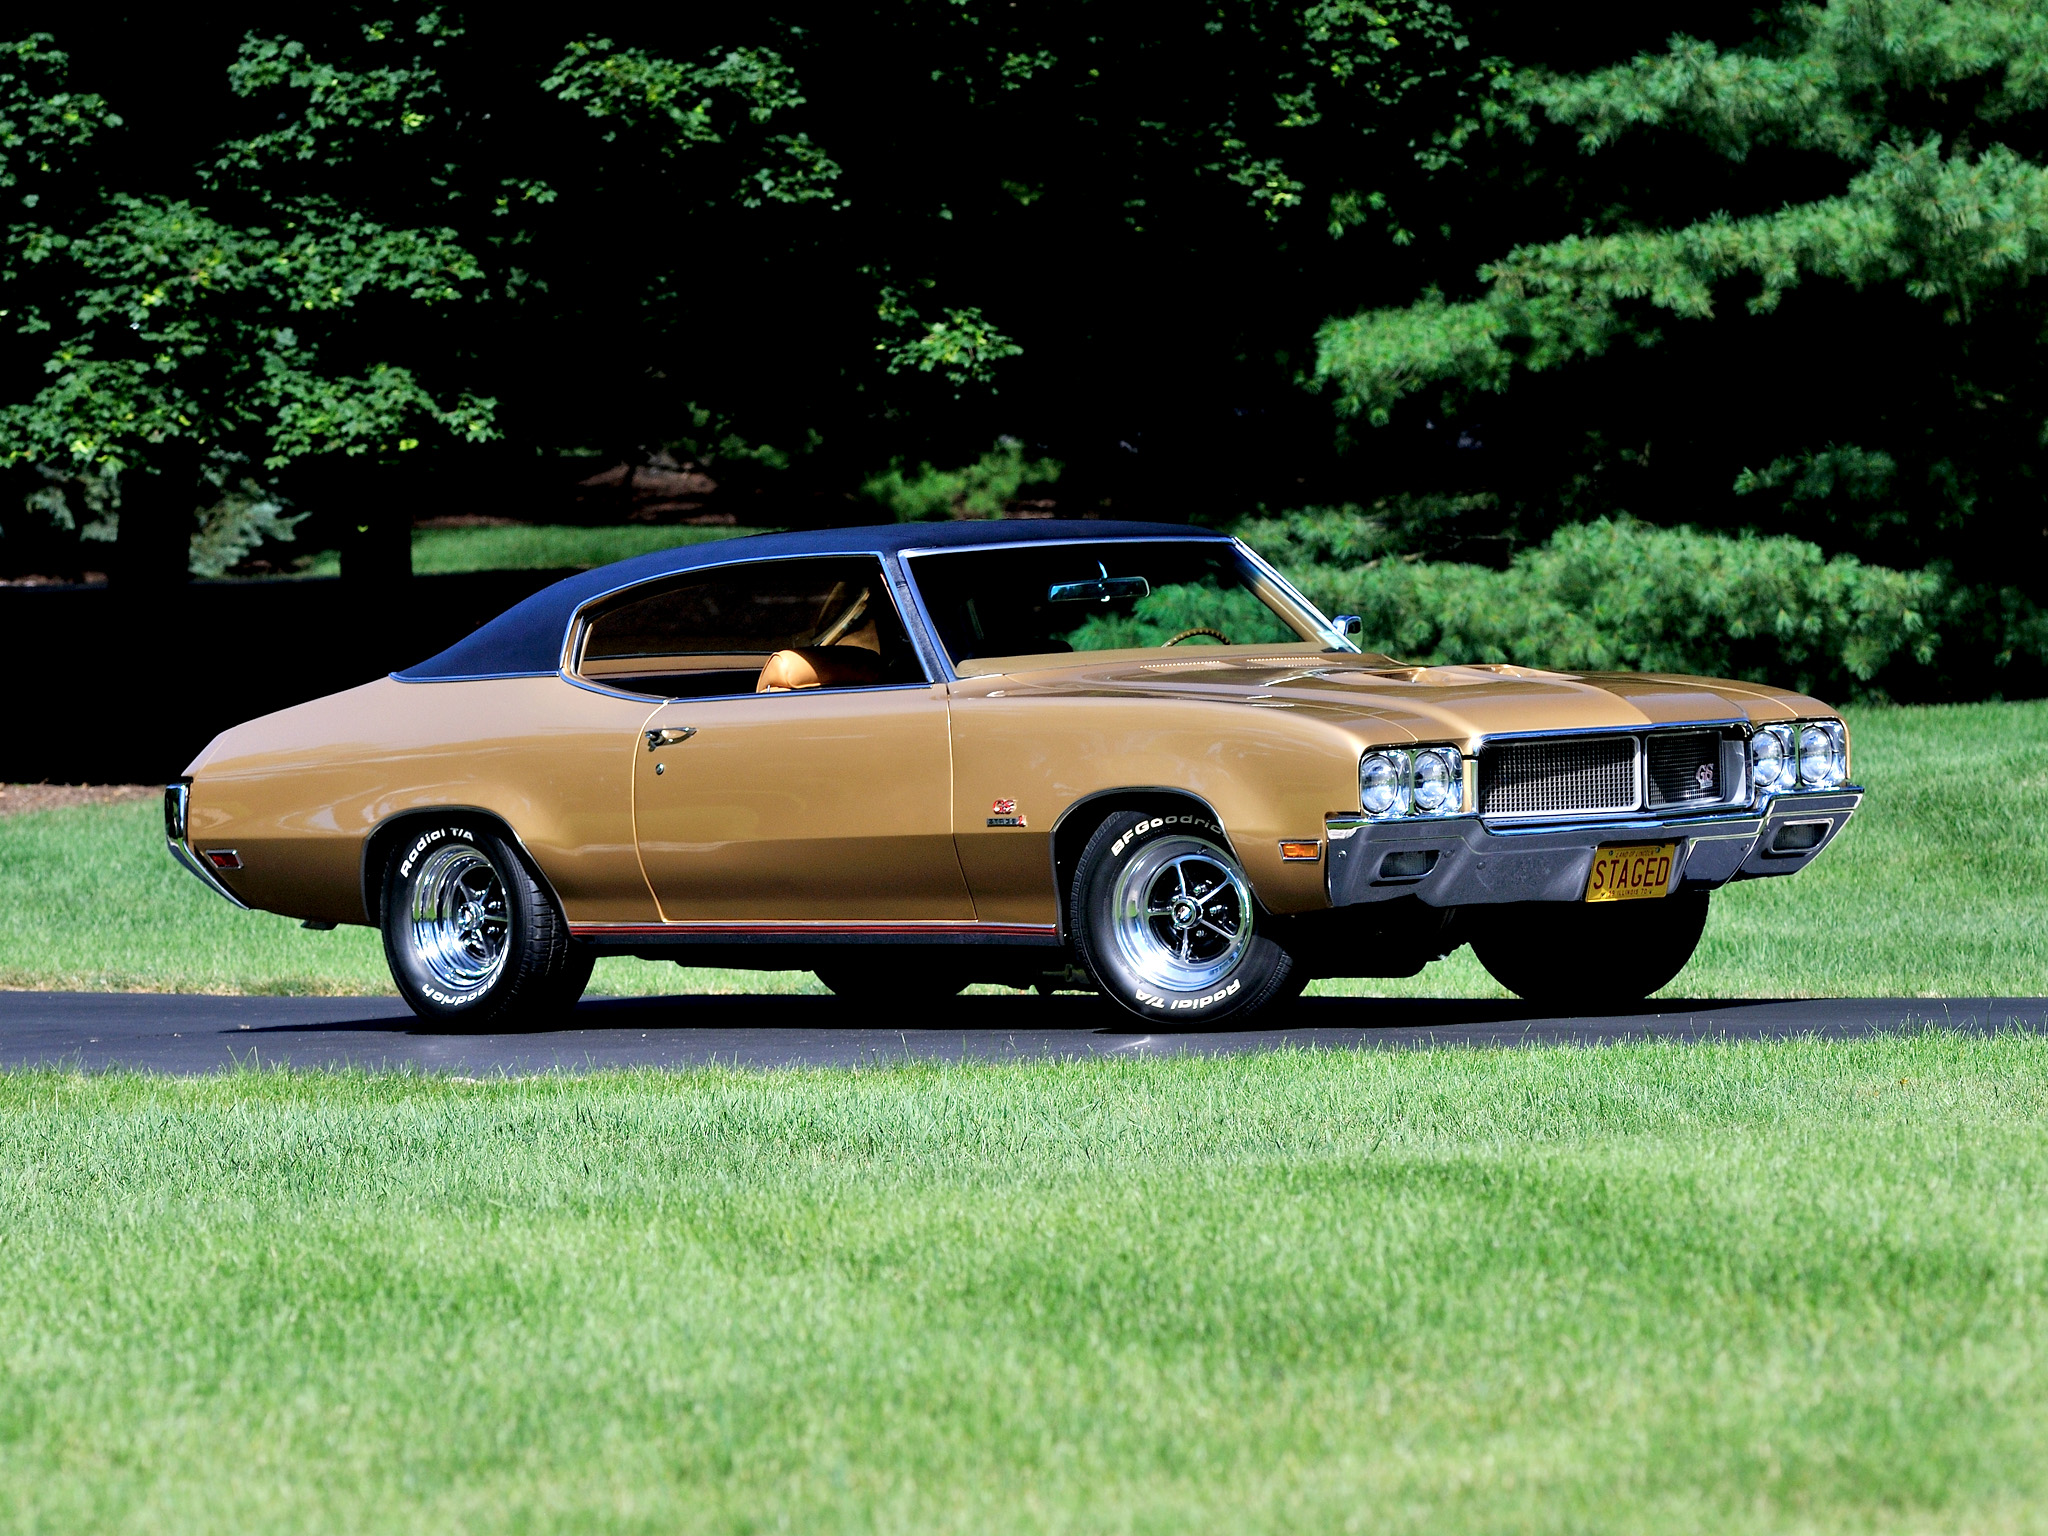 1970, Buick, Gs, 455, Stage 1, 44637, Classic, Muscle, G s Wallpaper